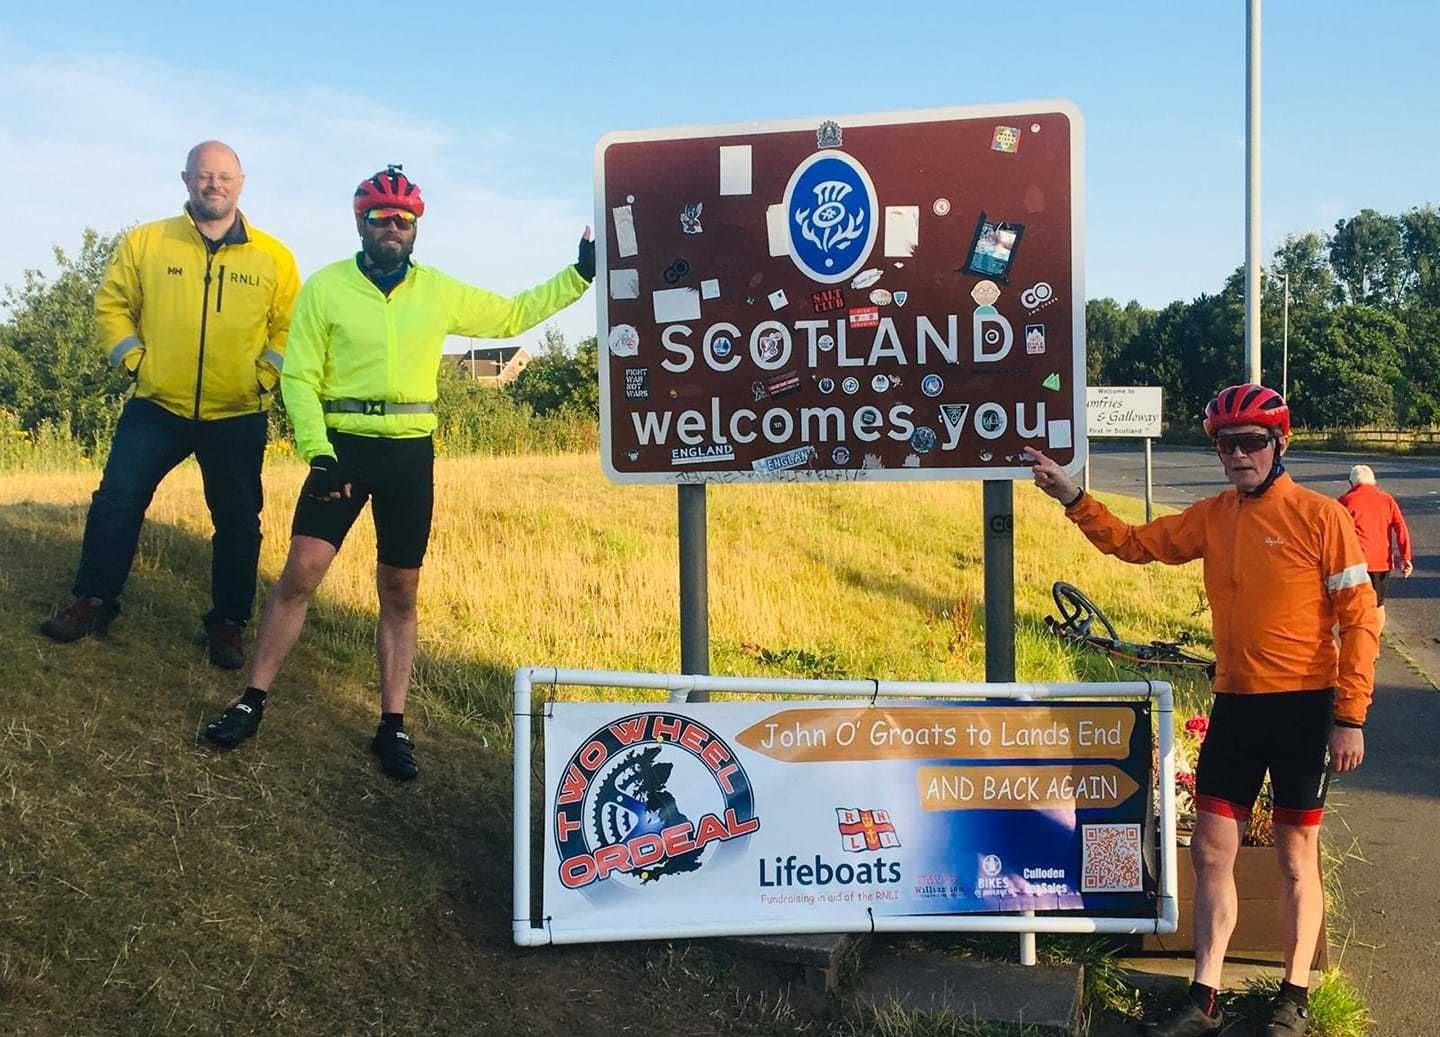 And back across the border into Scotland.